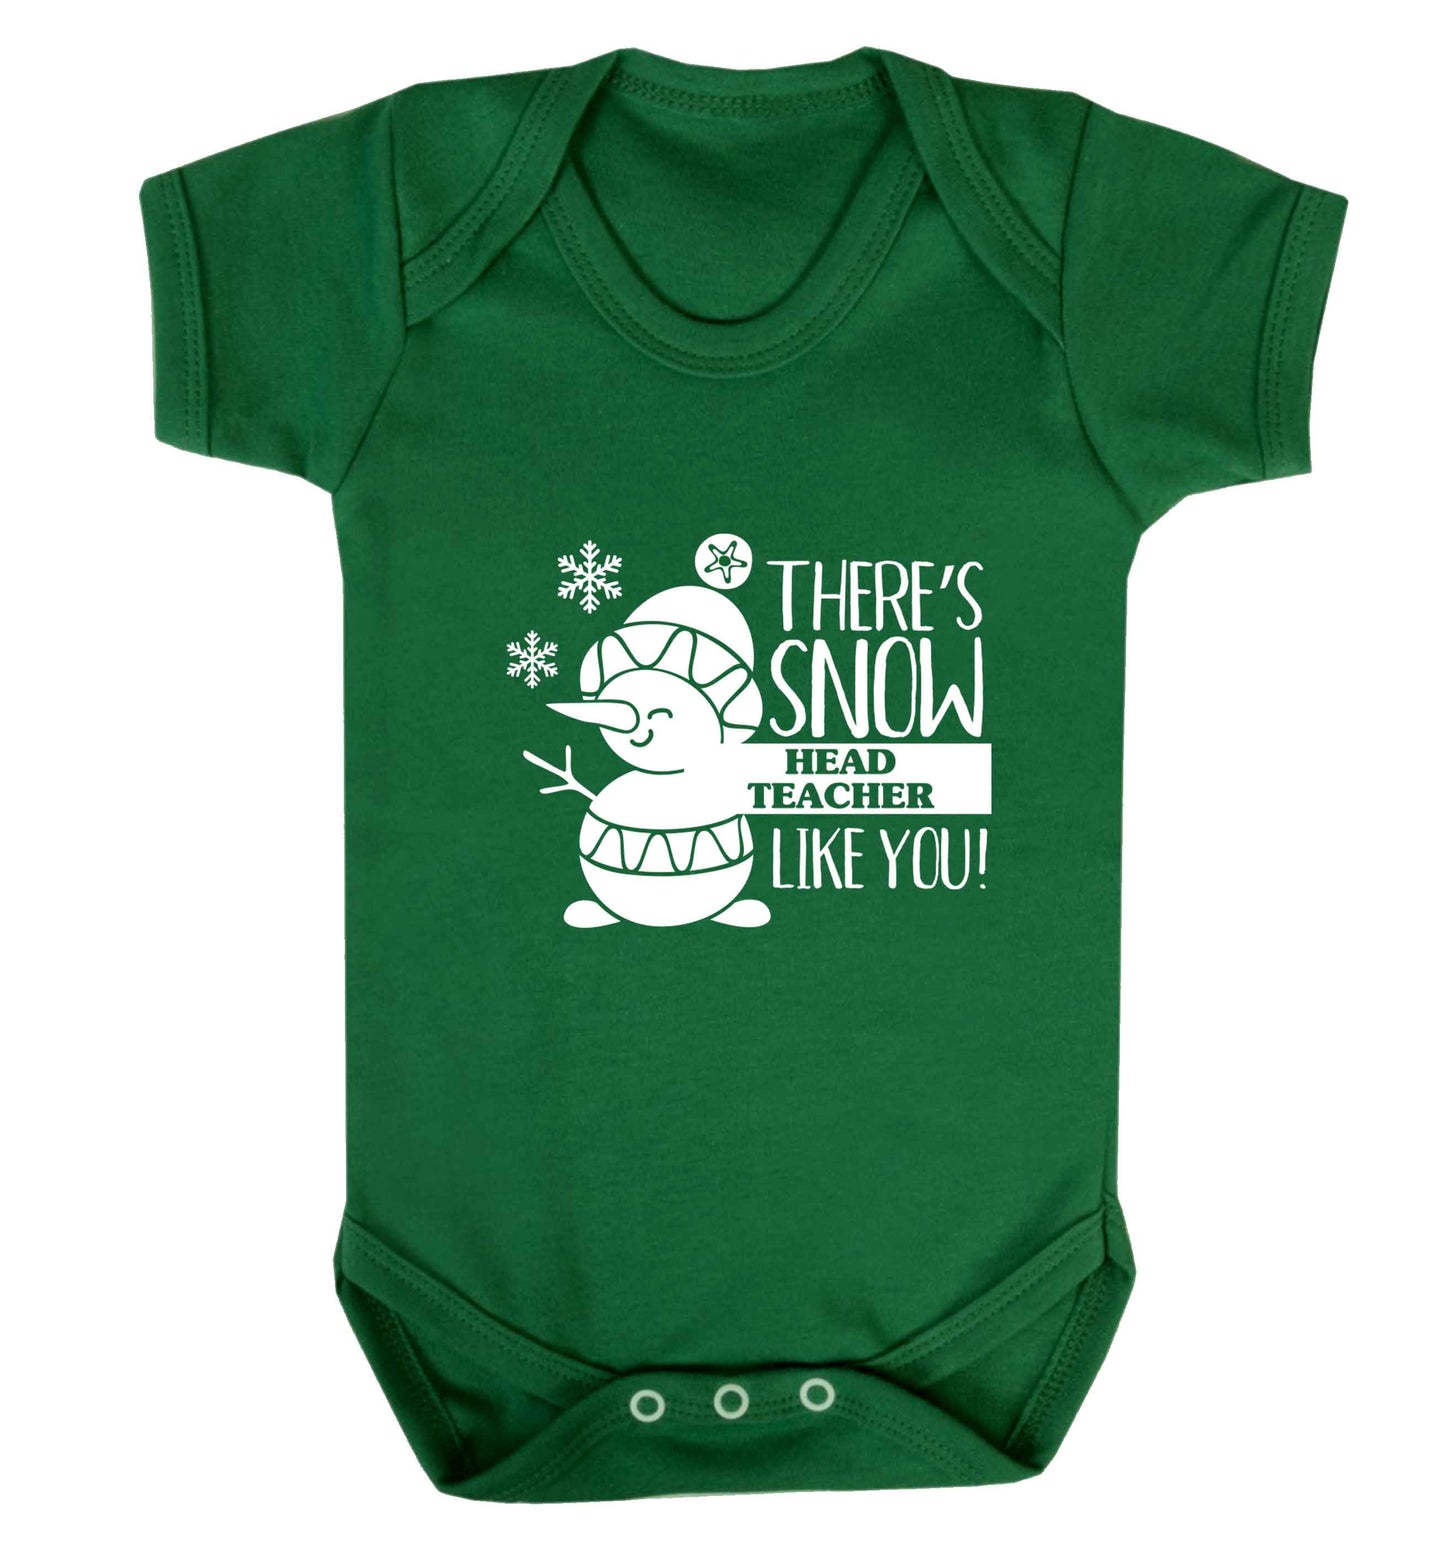 There's snow head teacher like you baby vest green 18-24 months